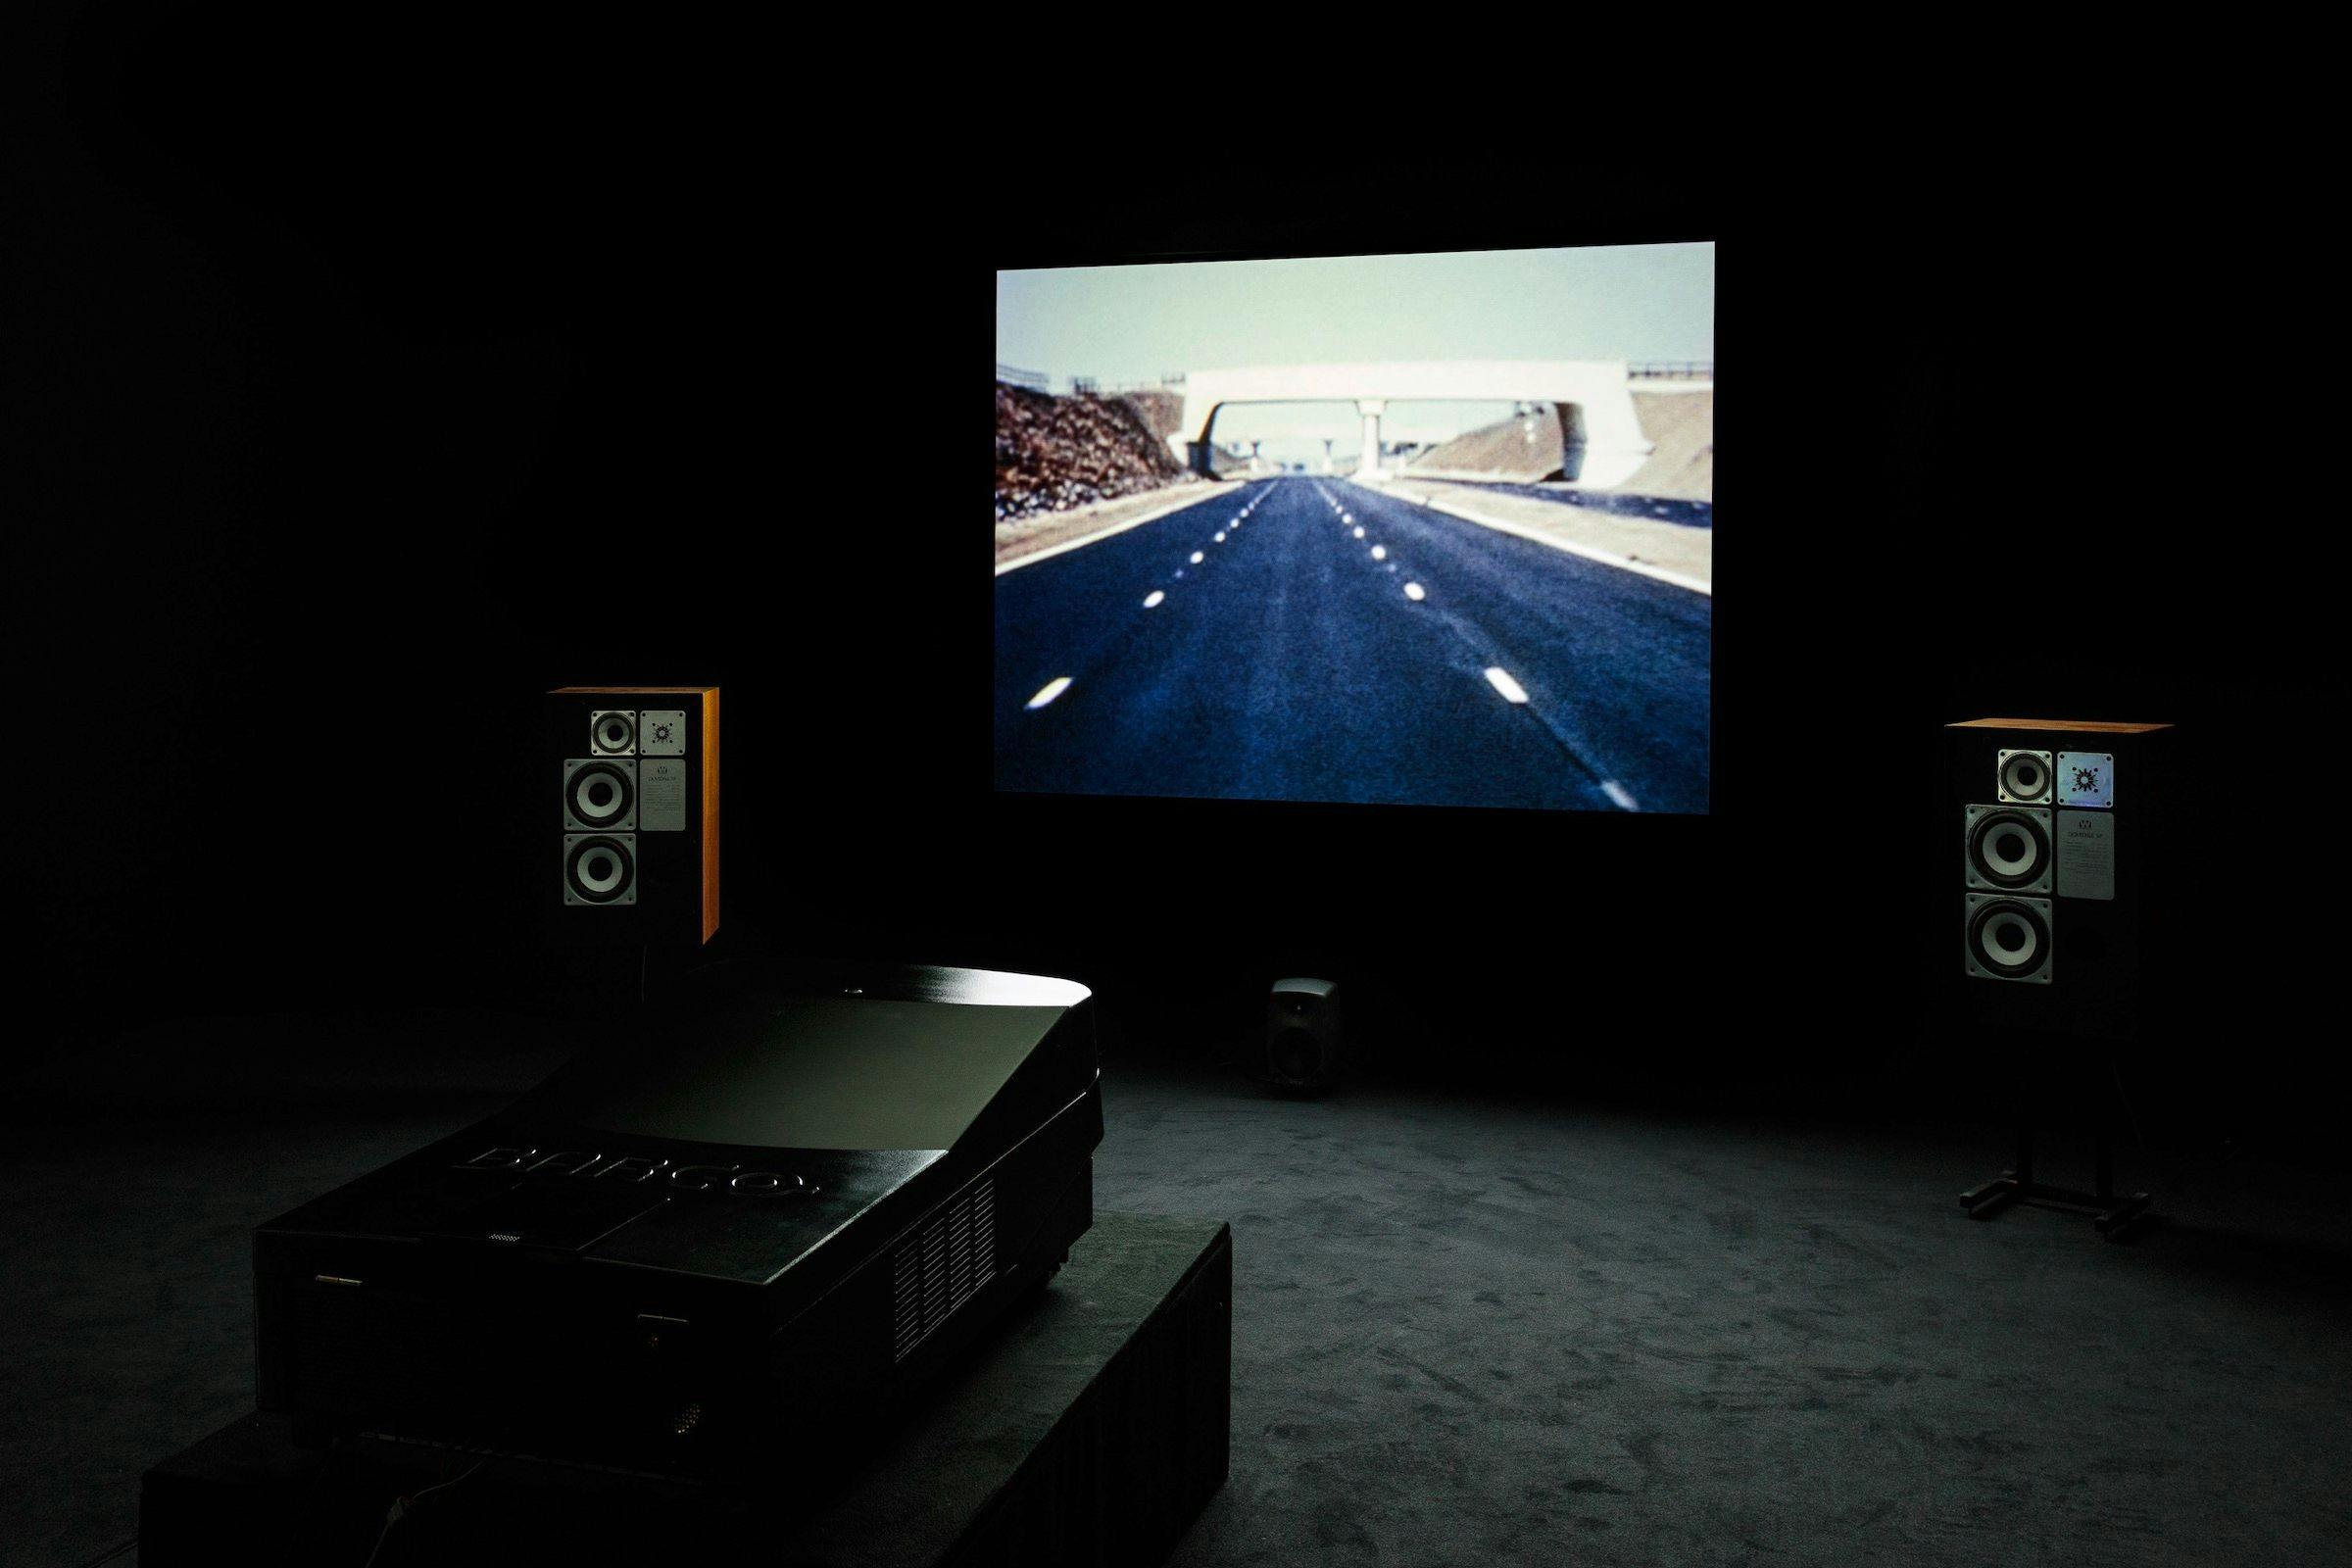 an installation view of Dream English Kid, 1964-1999 AD. The image of the work projected is a POV person driving a car. There are speakers either side of the projection and the projector is visible